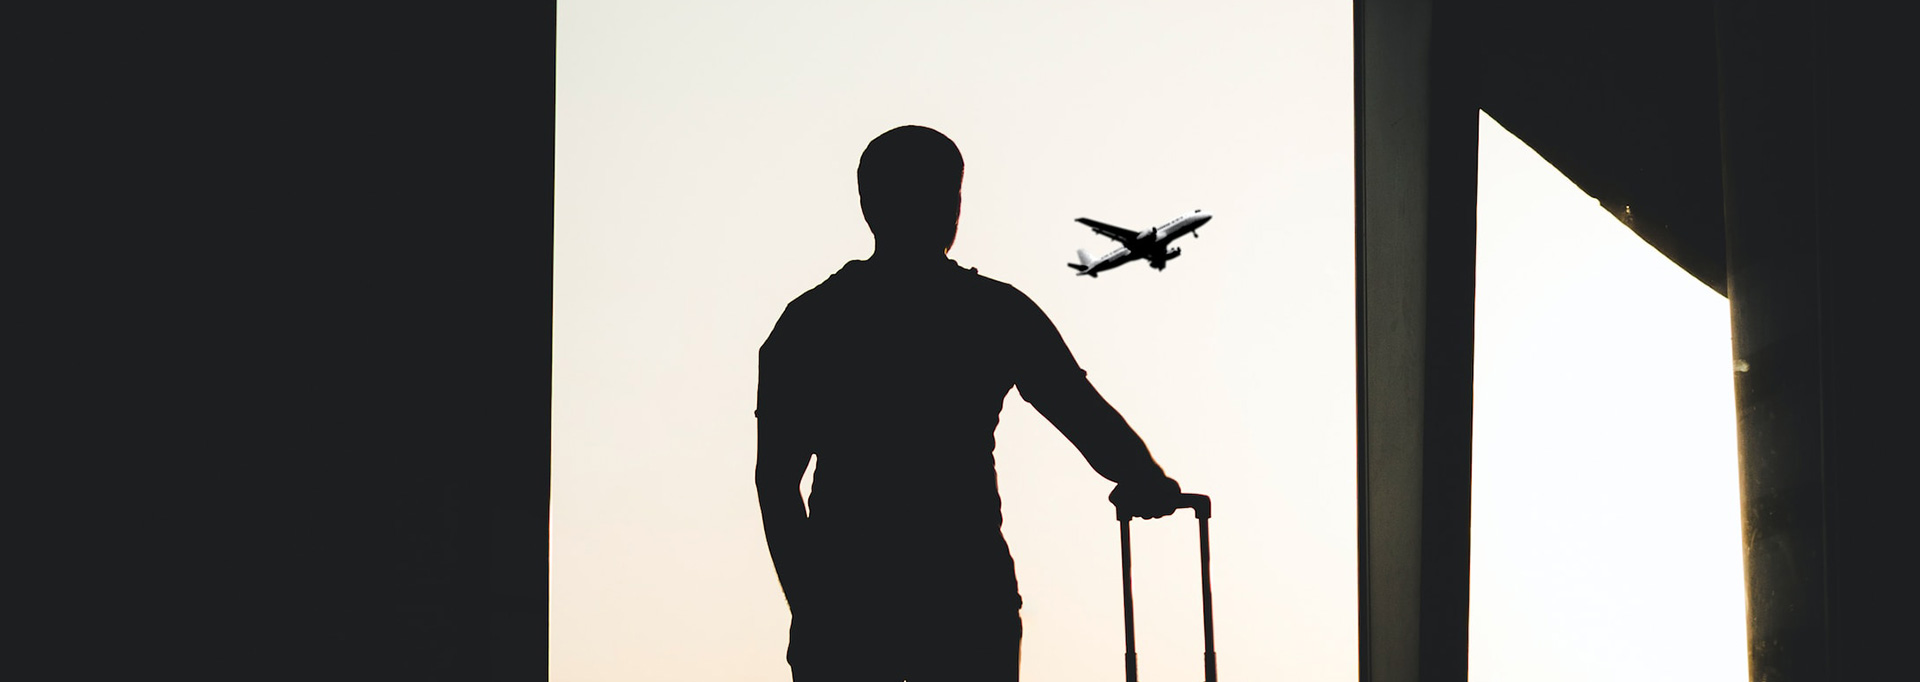 silhouette of man standing in airport looking at airplanes